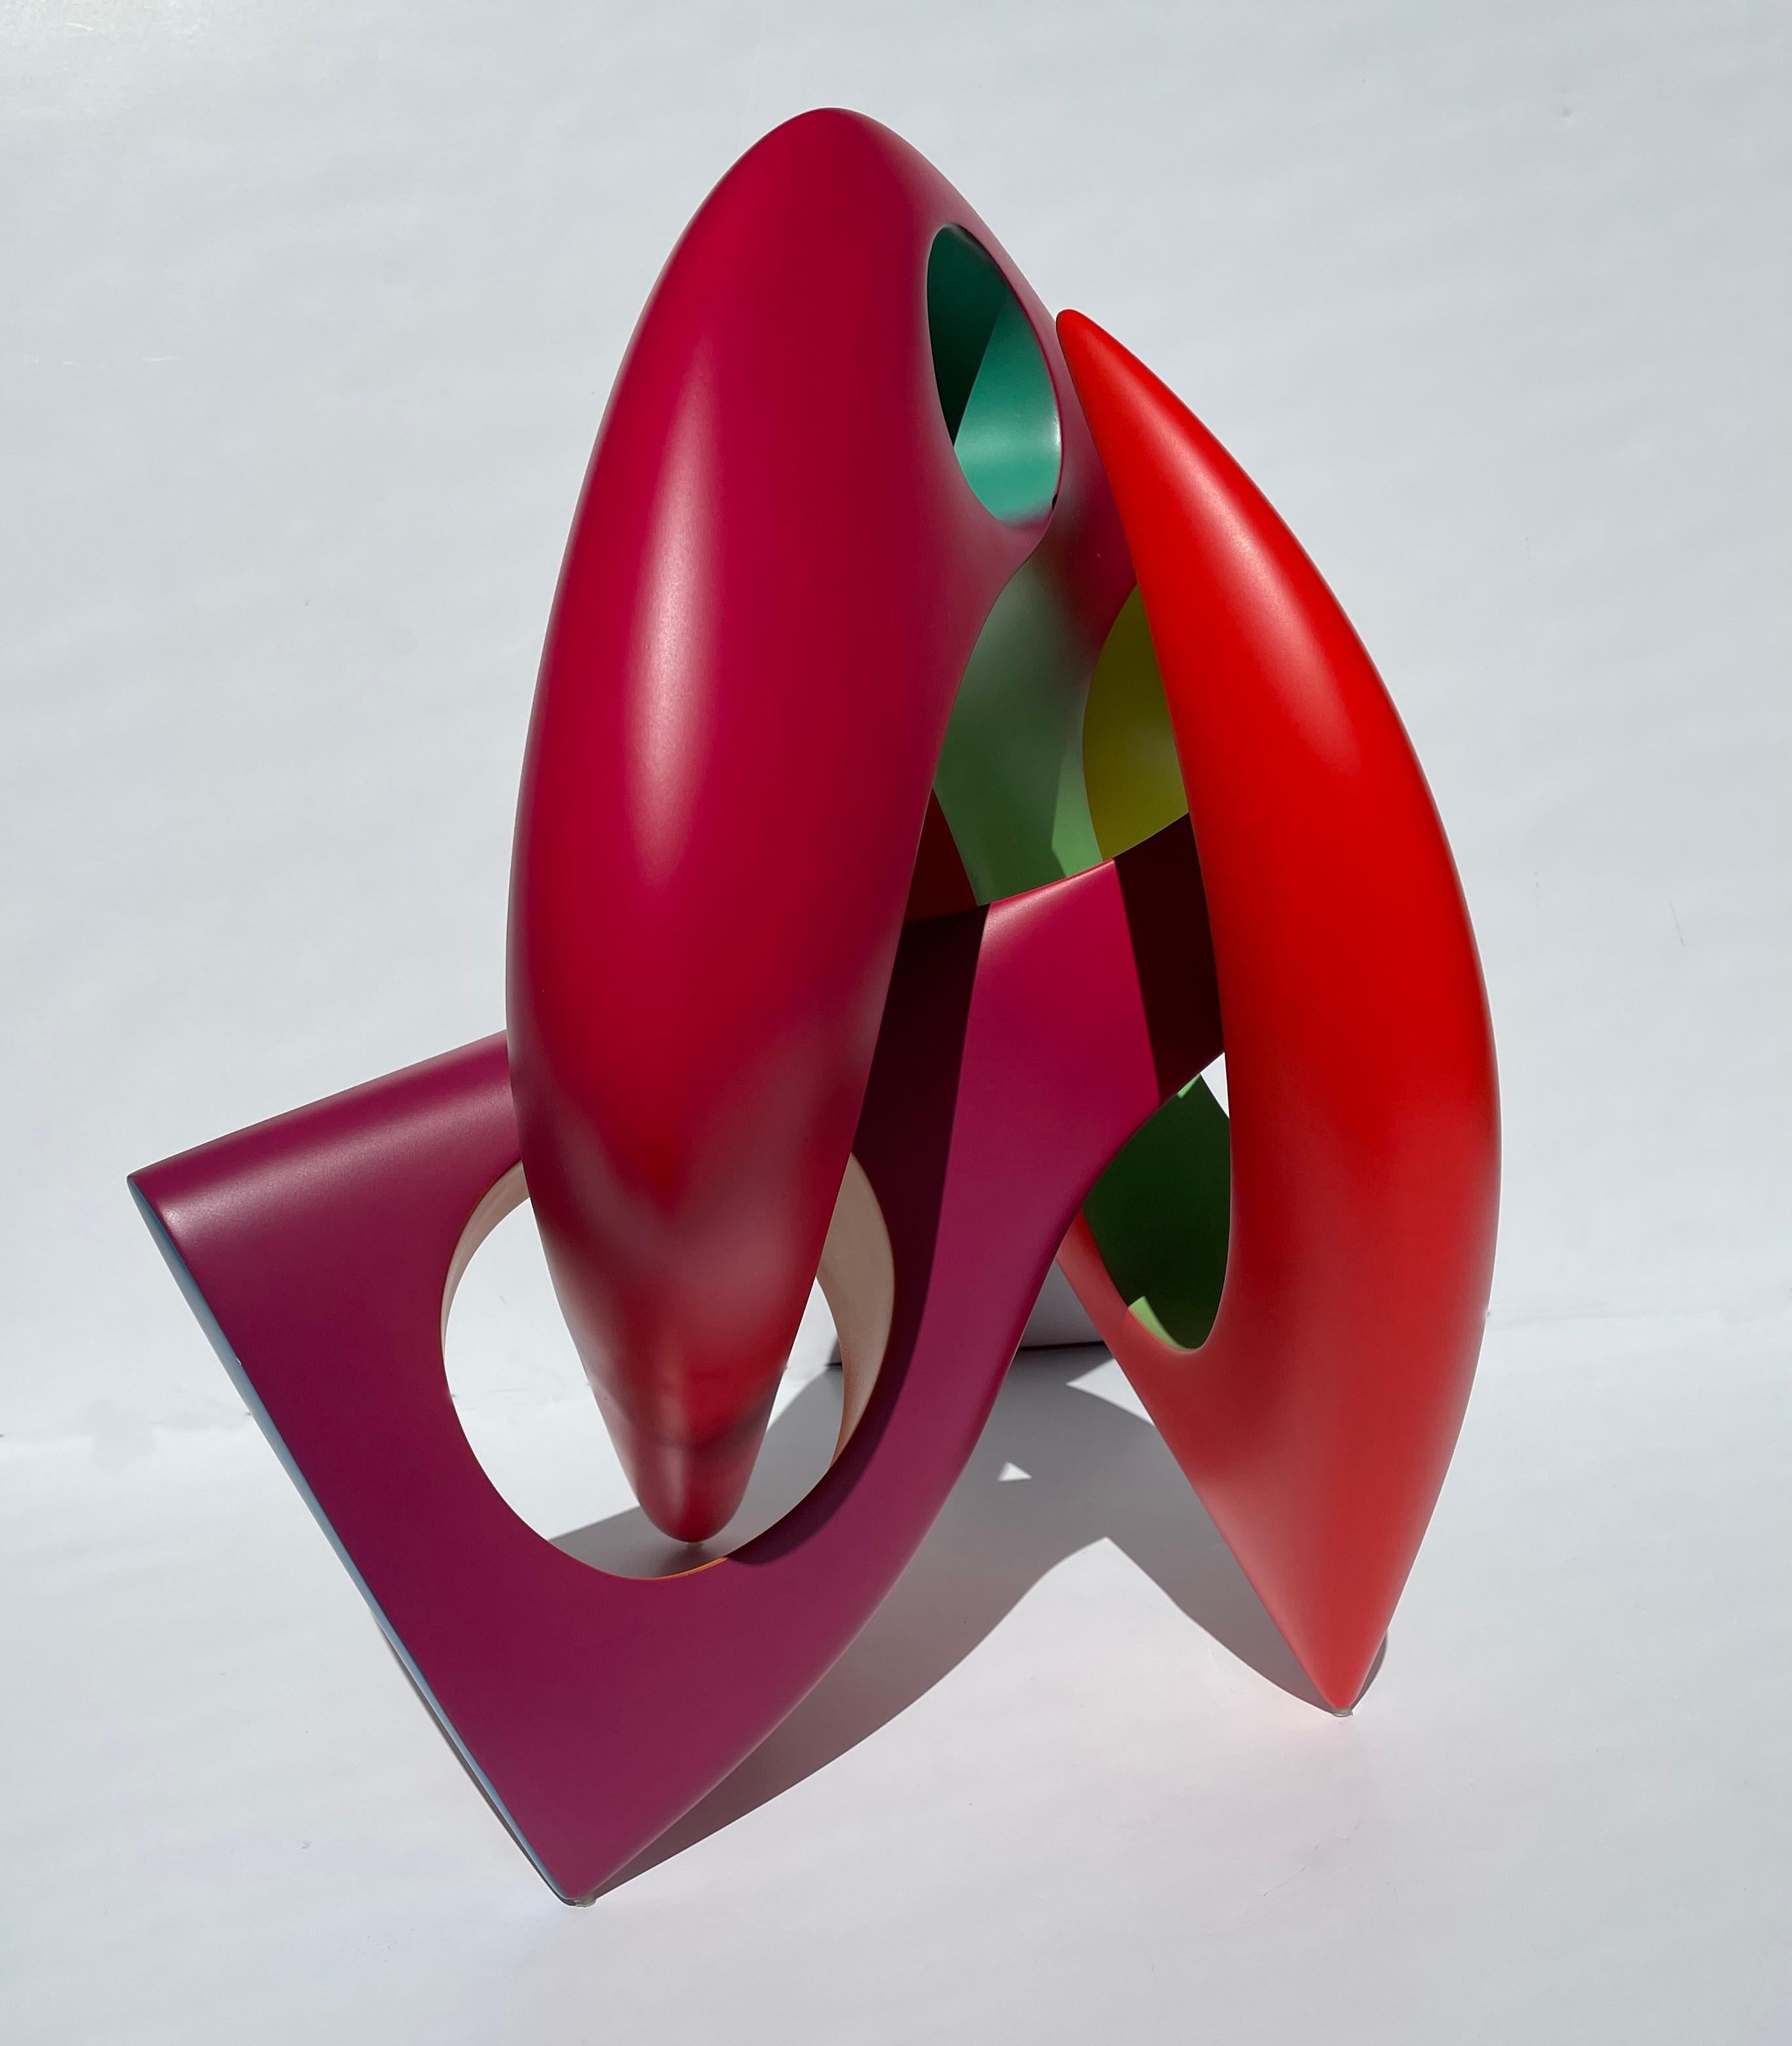 Helical Passage, Abstract Sculpture Brightly Colored Geometric Interlocking Form 4